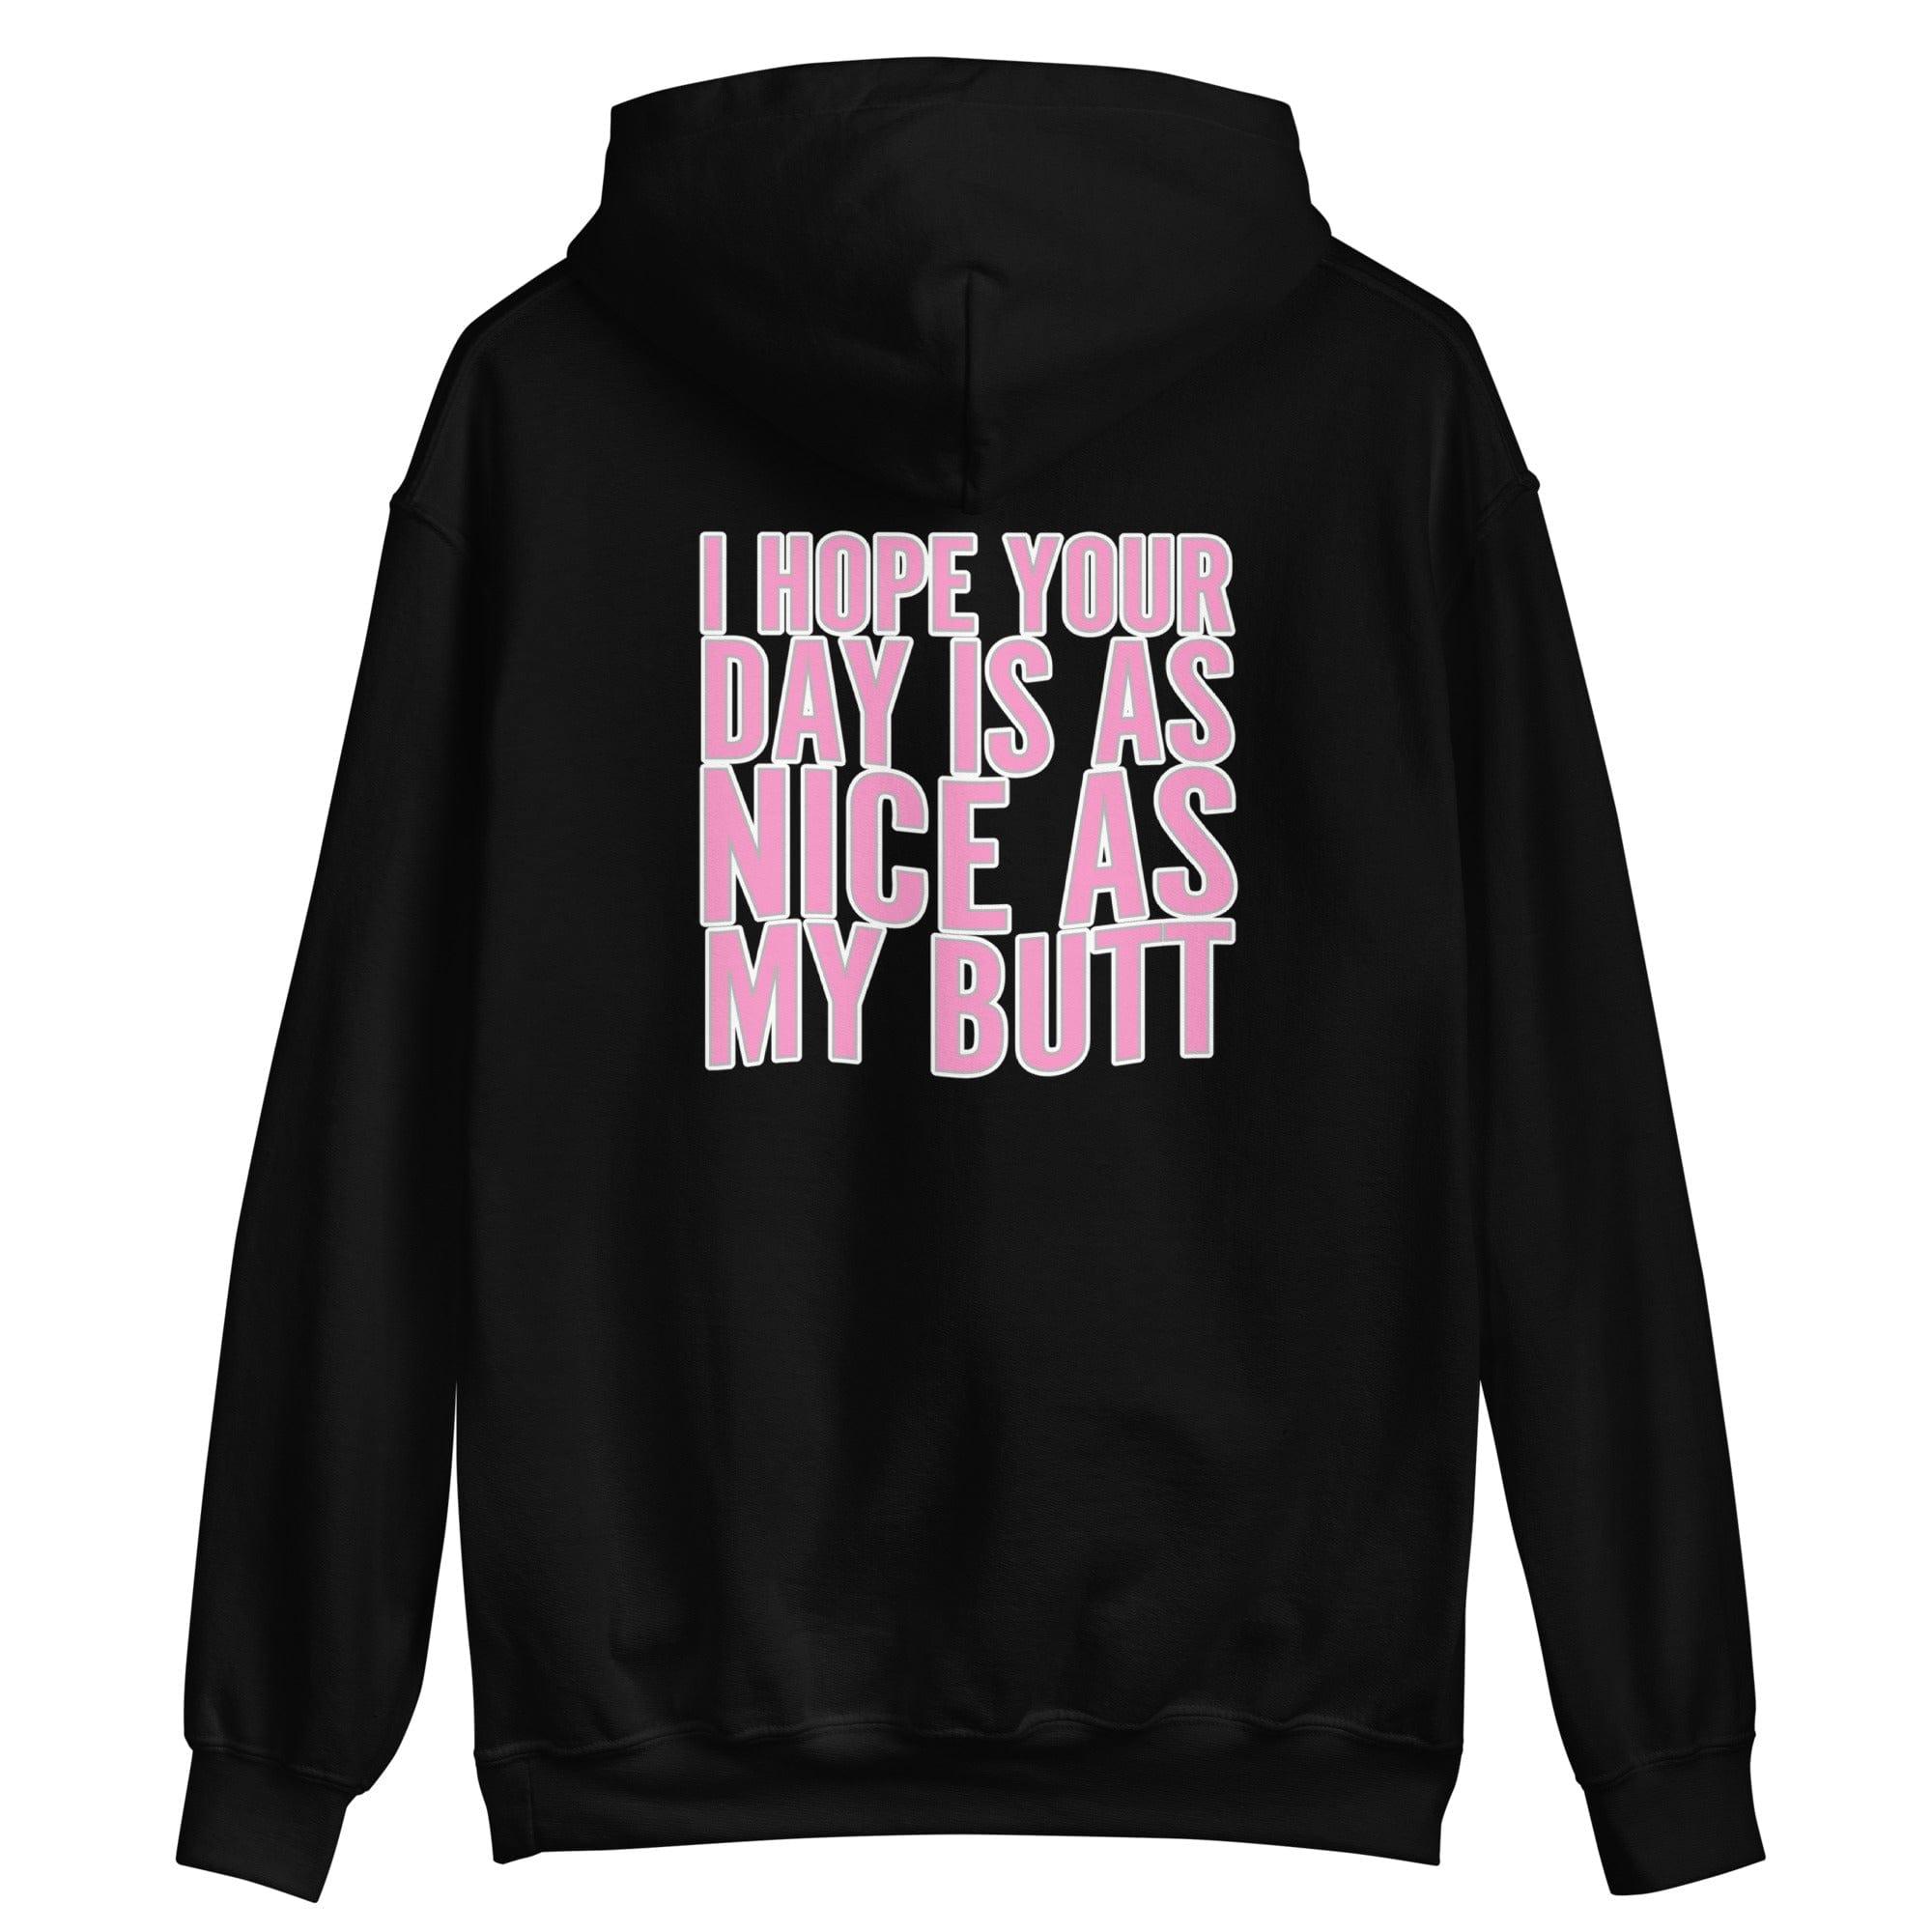 Rear Design Placement Humor unisex hoodie I hope your day is as Nice as my Butt - TopKoalaTee